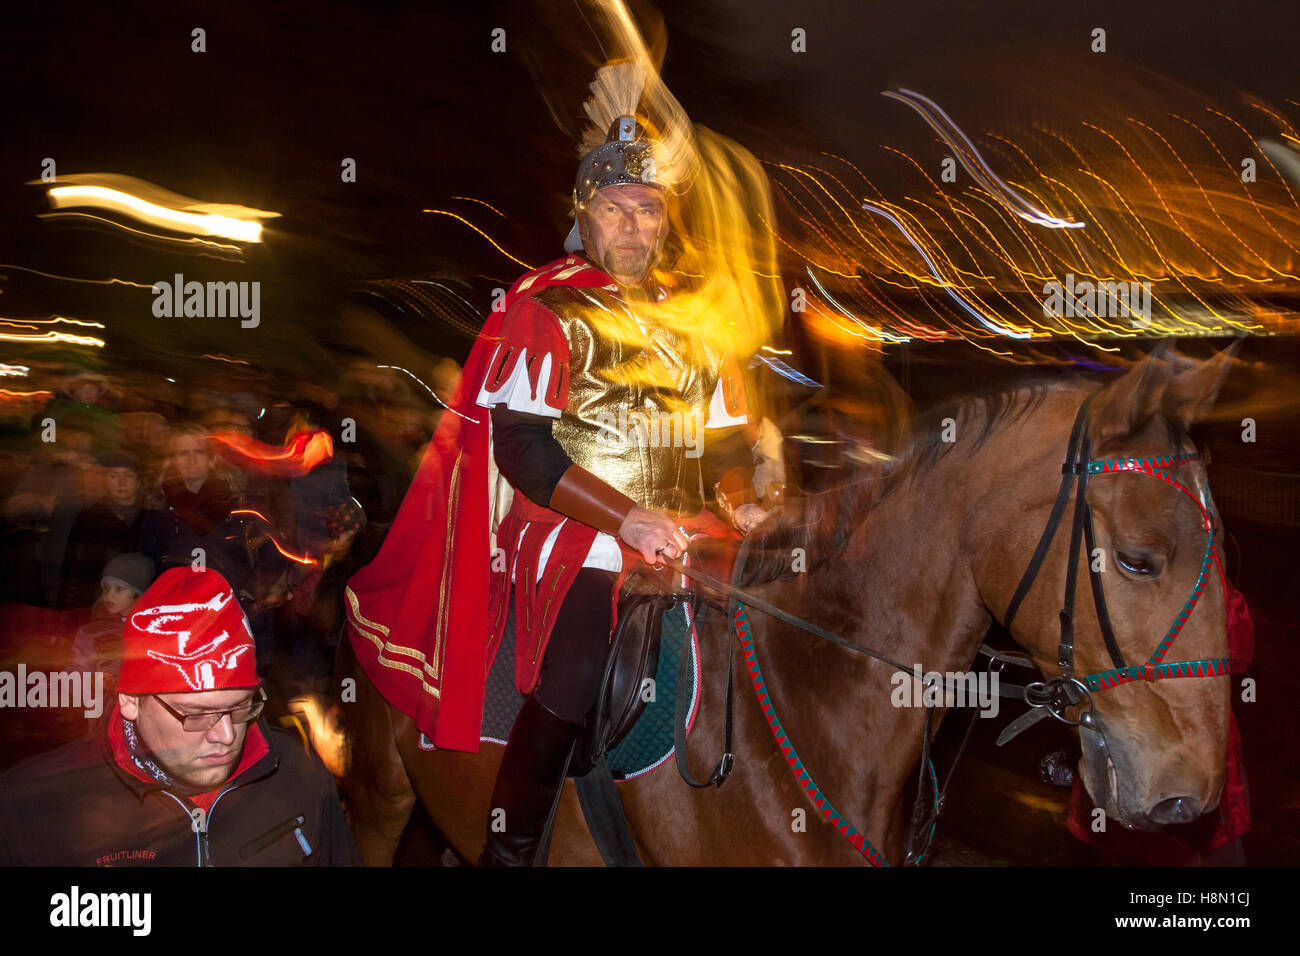 Europe, Germany, North Rhine-Westphalia, Cologne, the St. Martin's procession, St. Martin on his horse. Stock Photo